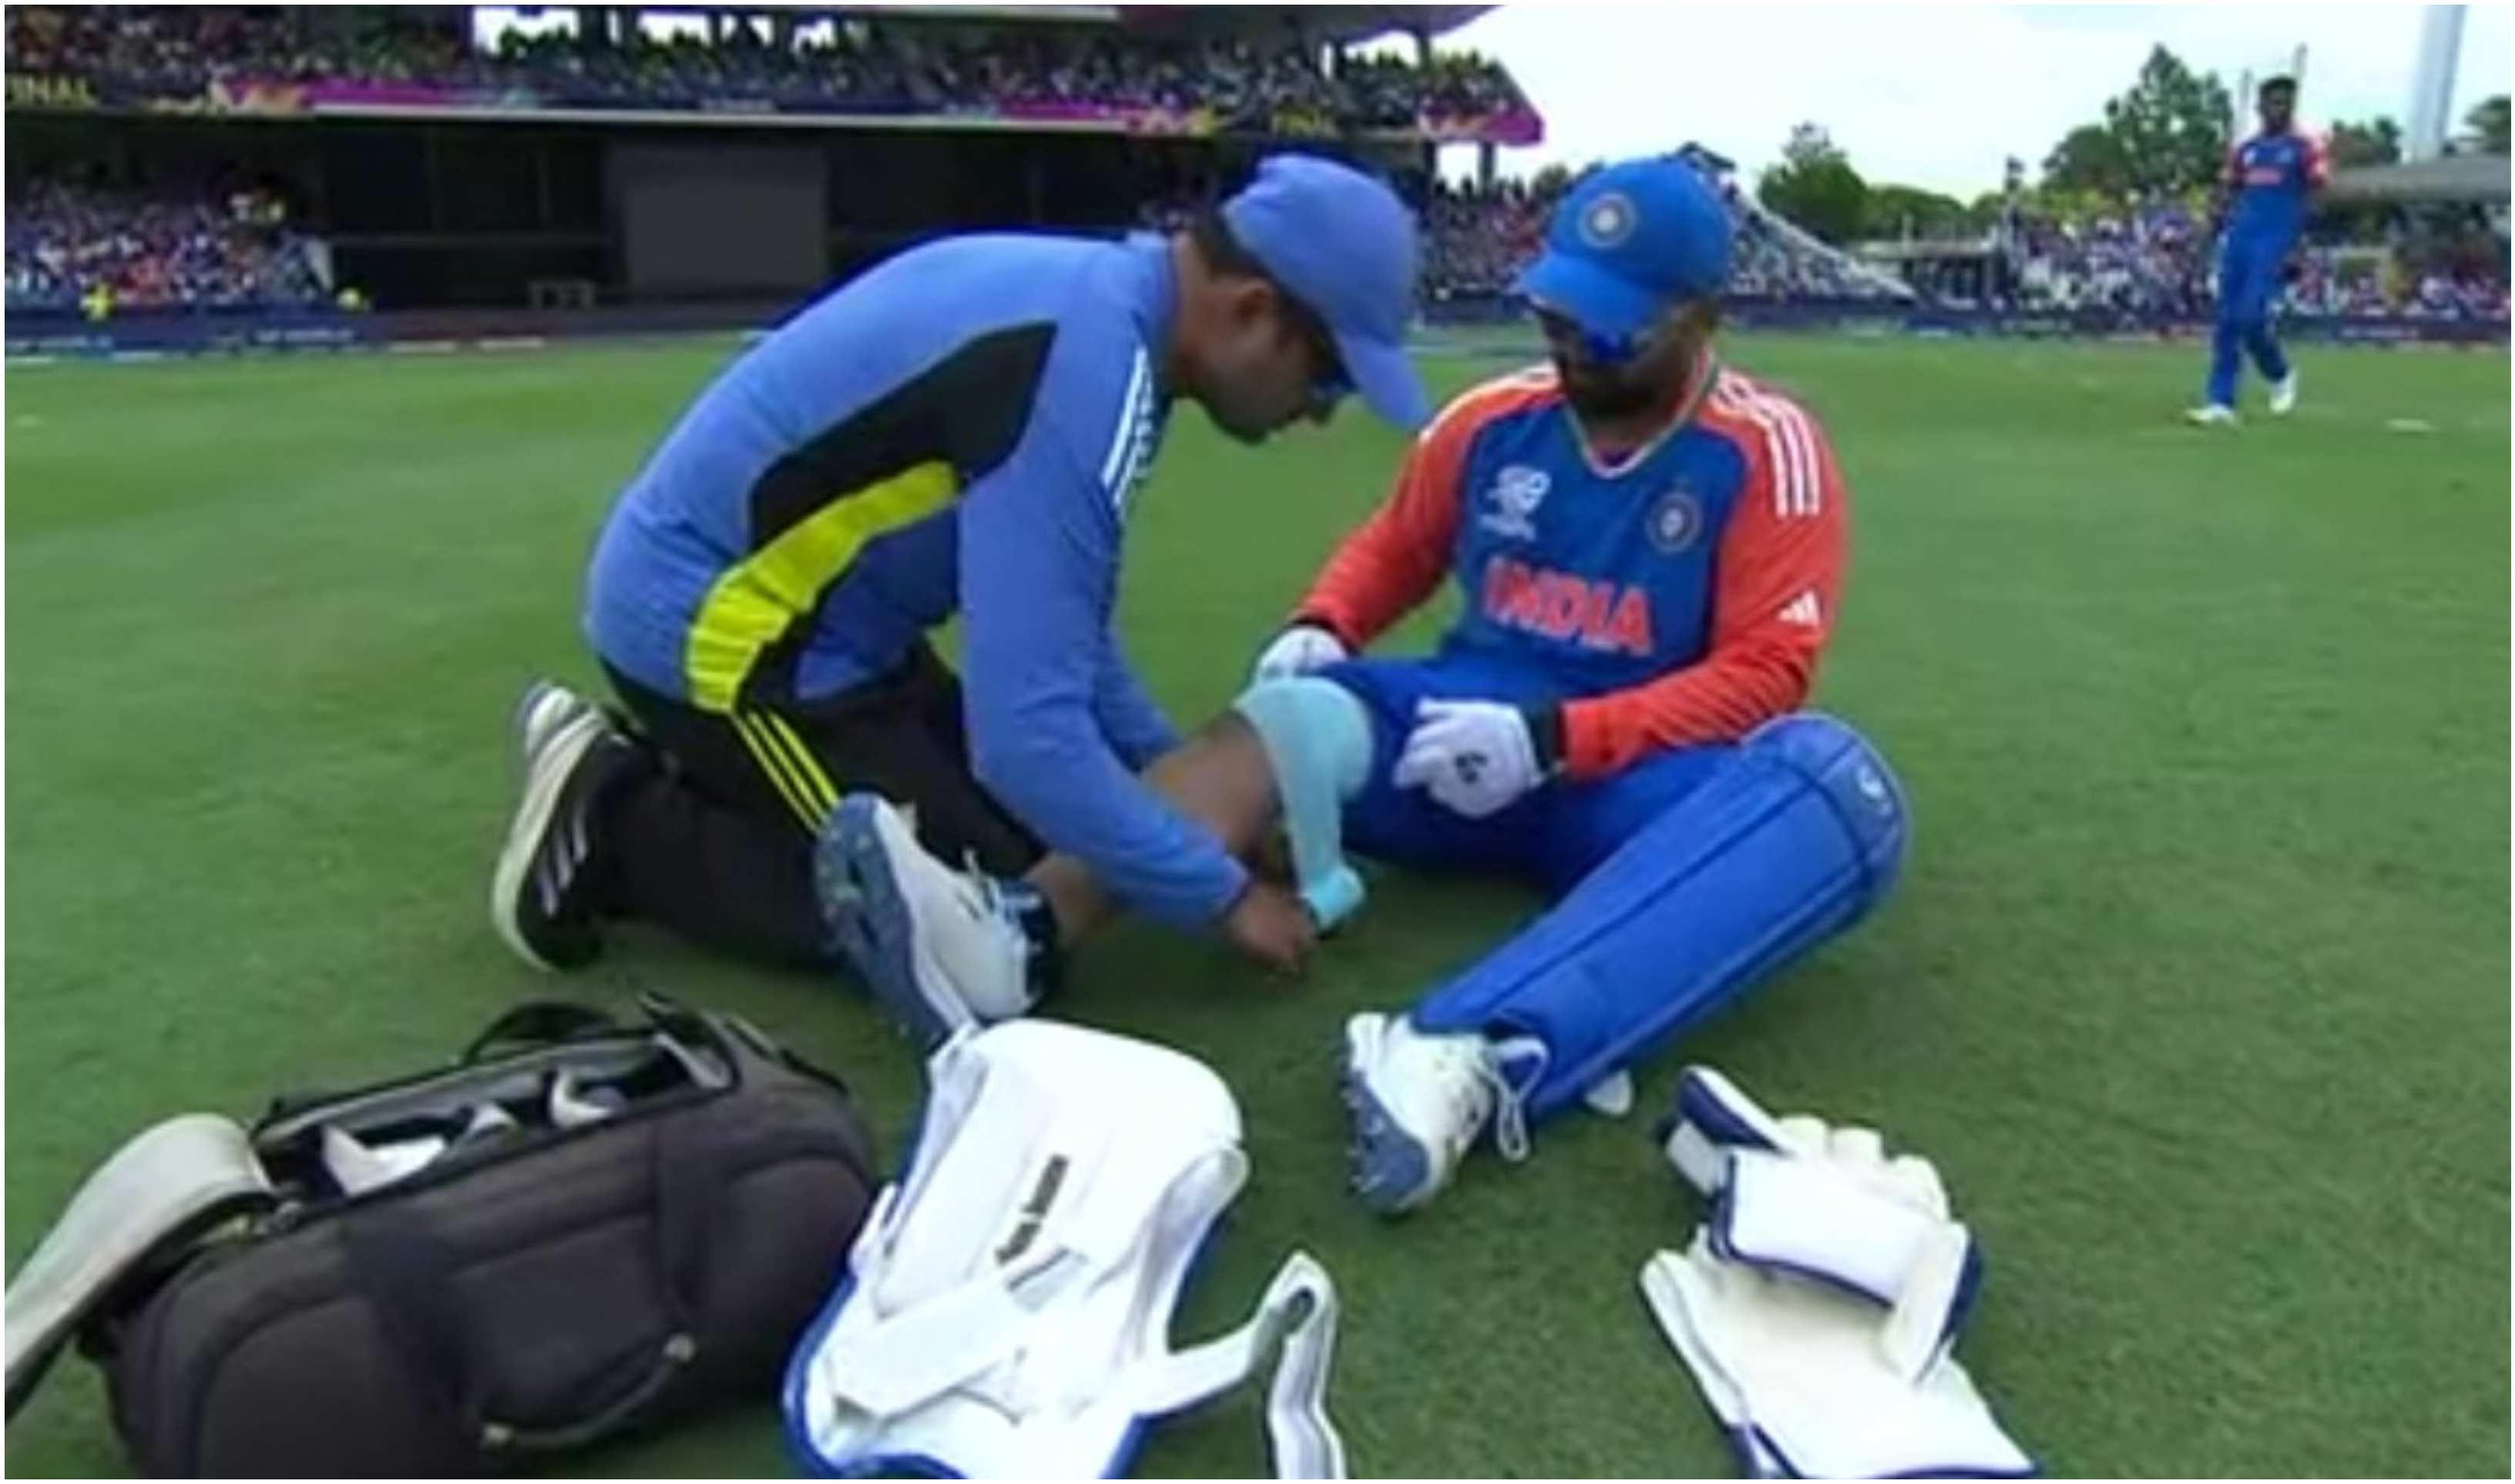 Rishabh Pant called for a medical time-out when South Africa were cruising | X